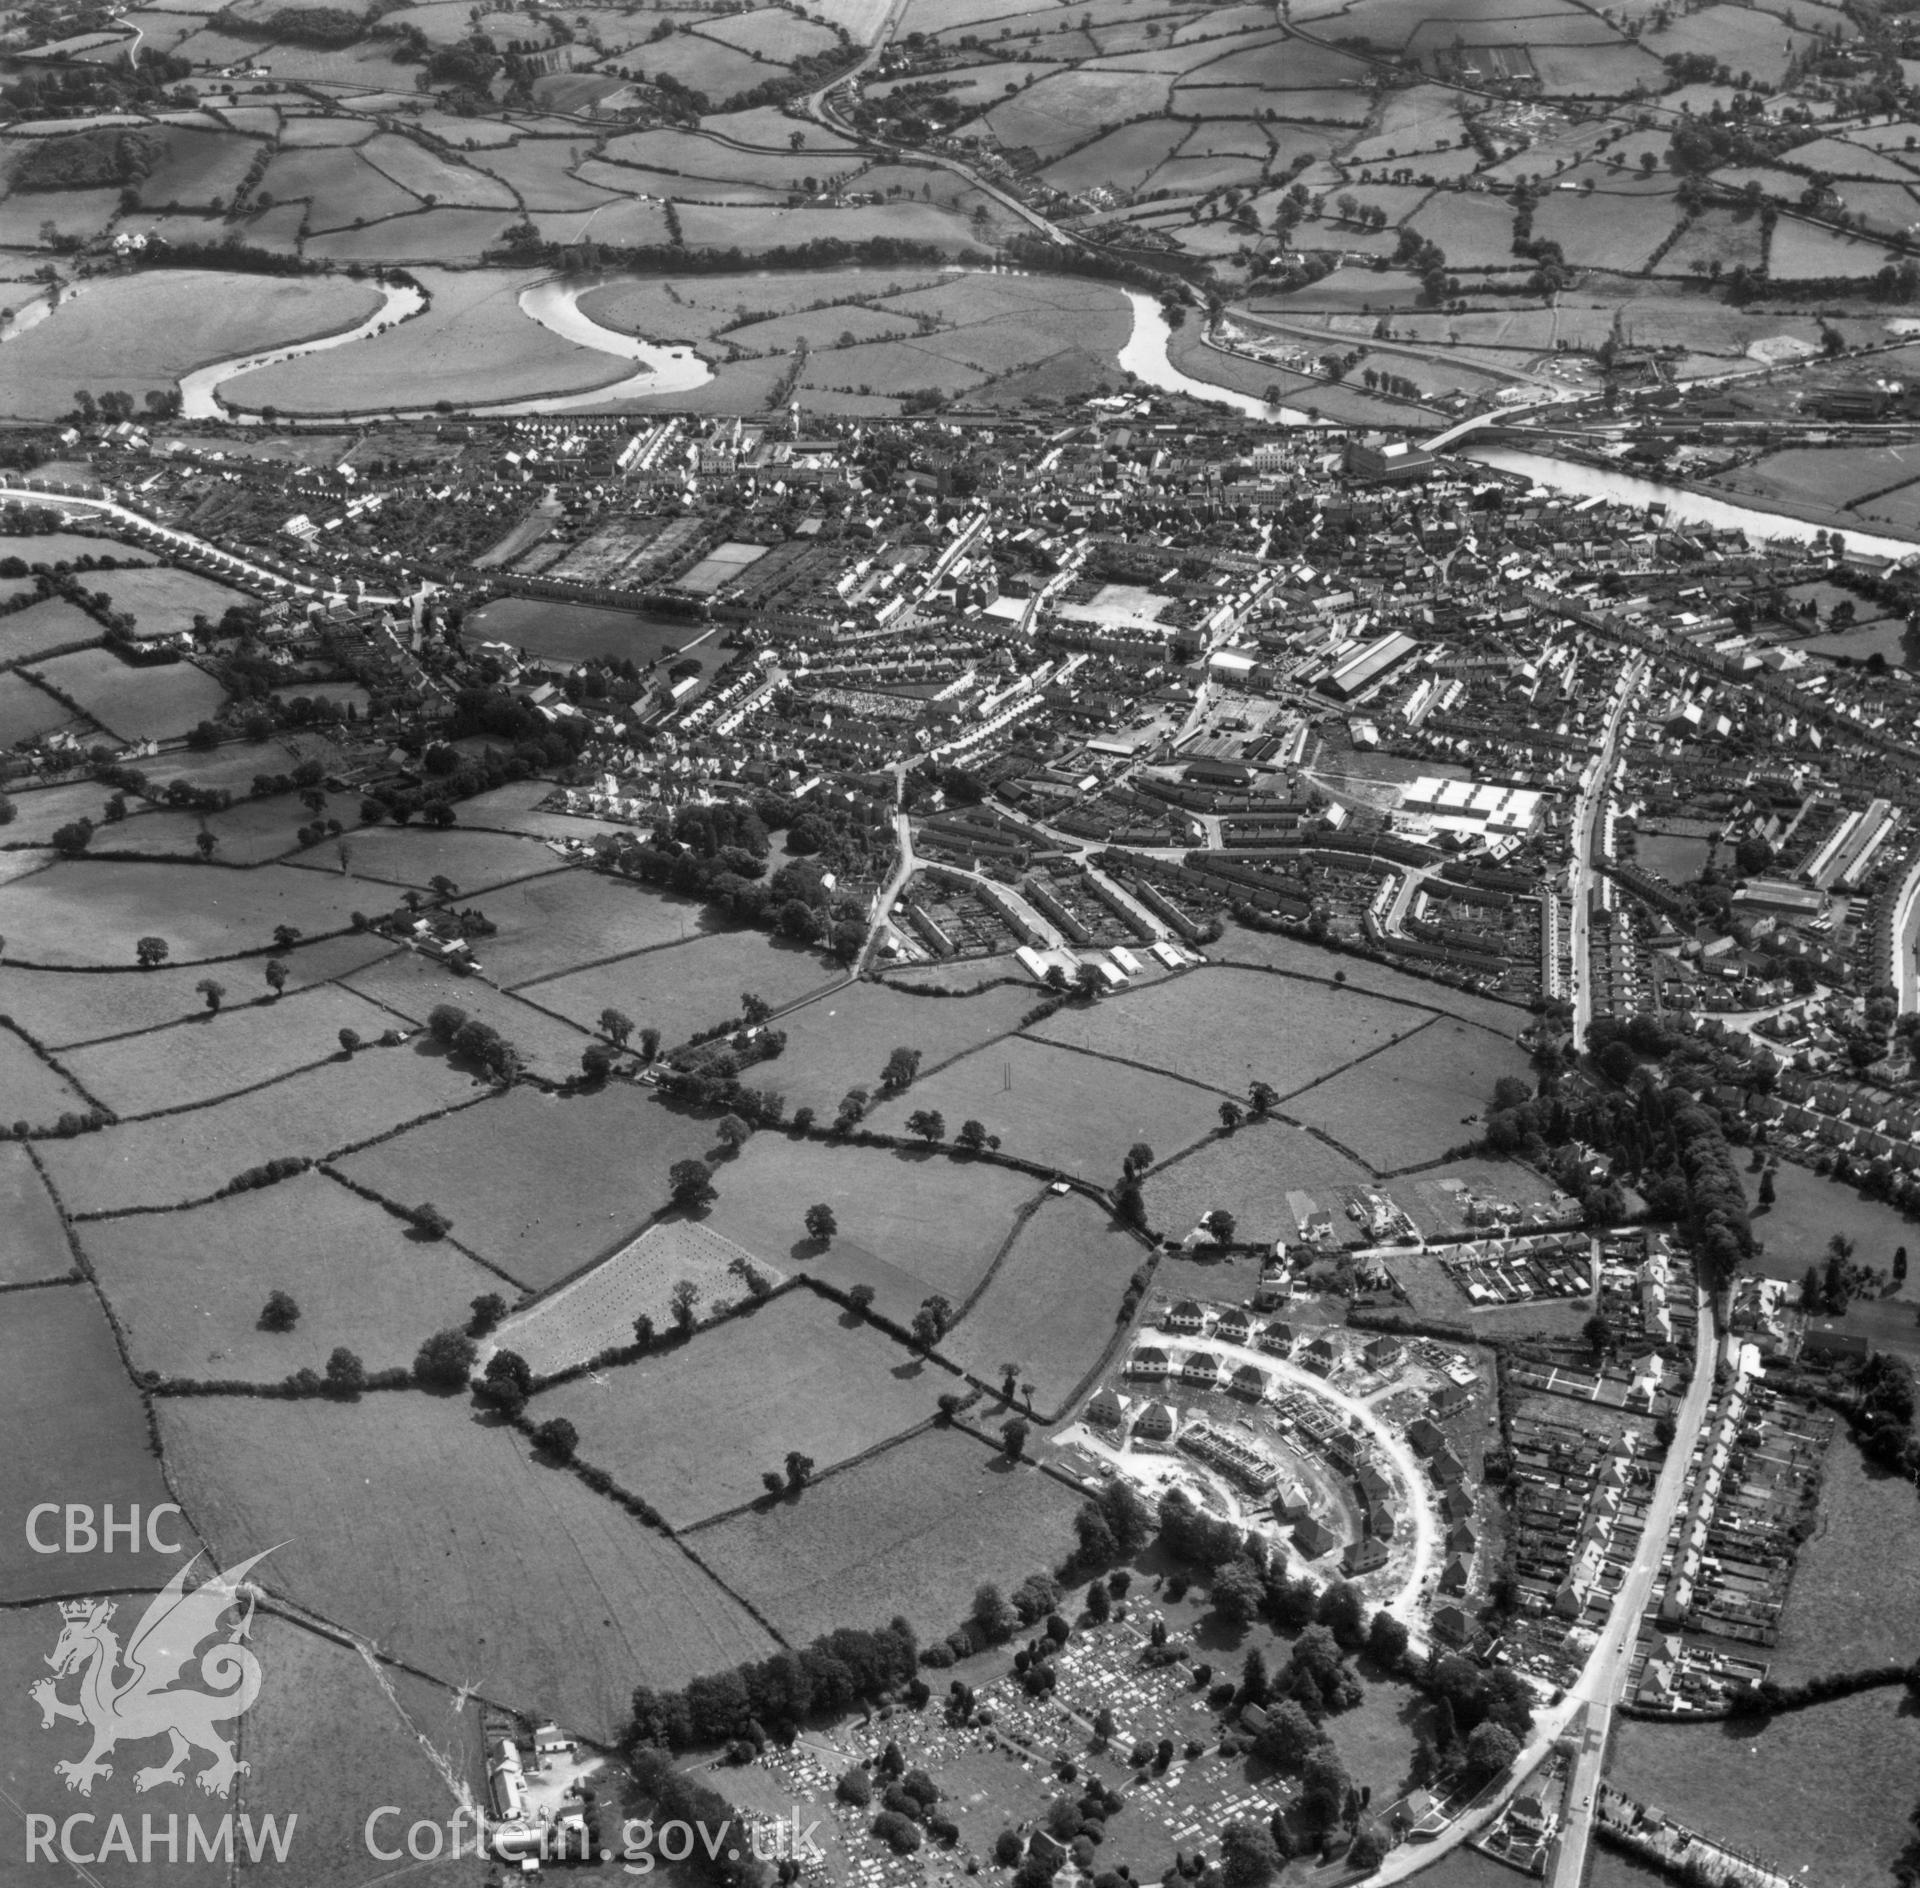 General view of Carmarthen, showing cemetery and new housing at Heol Rudd in the foreground. Oblique aerial photograph, 5?" cut roll film.